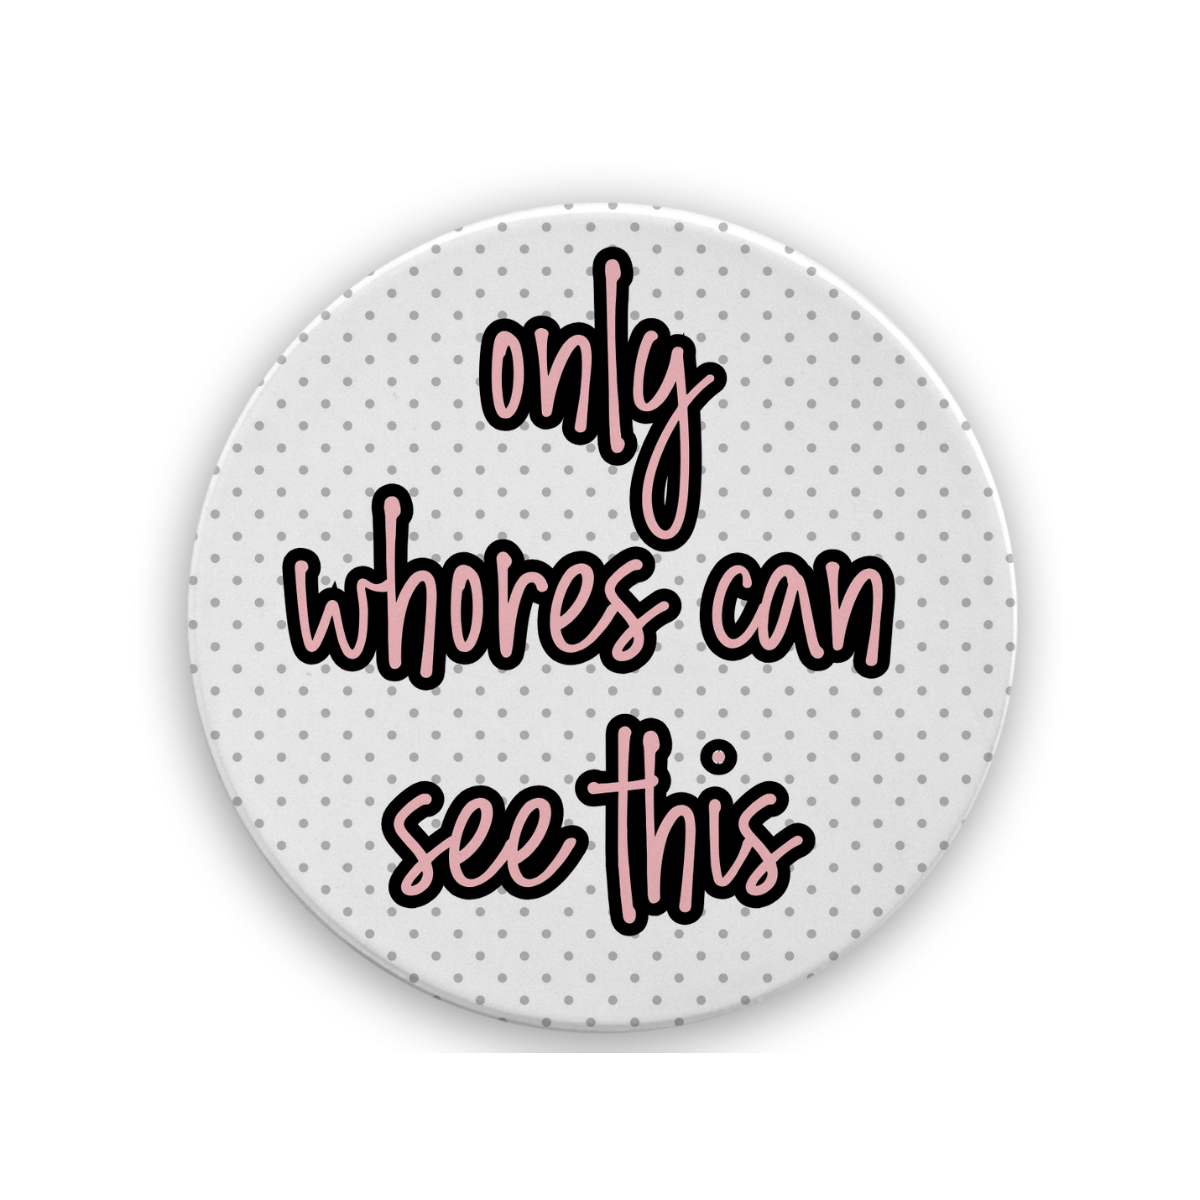 Only Whores Can See This | Drink Coaster - The Pretty Things.ca